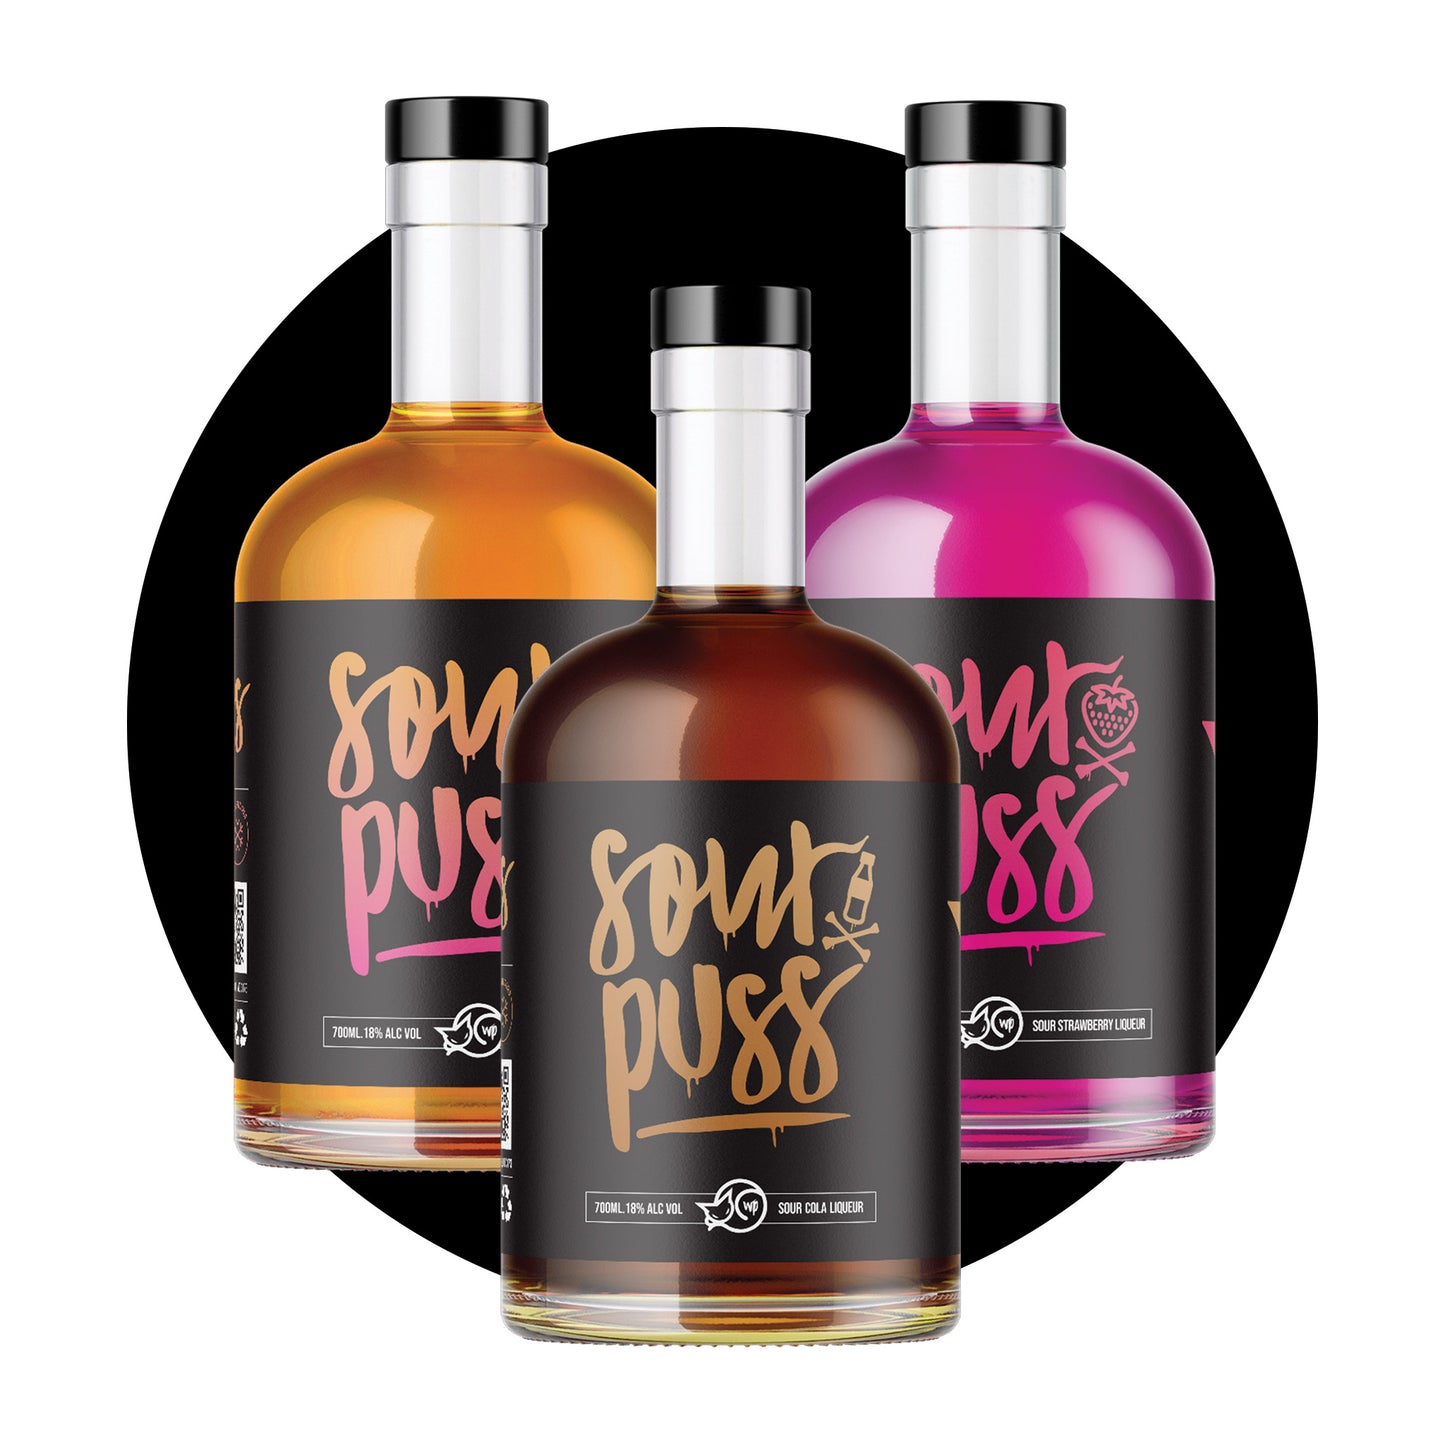 Sour Puss New Flavors 3 Pack - 80Proof 